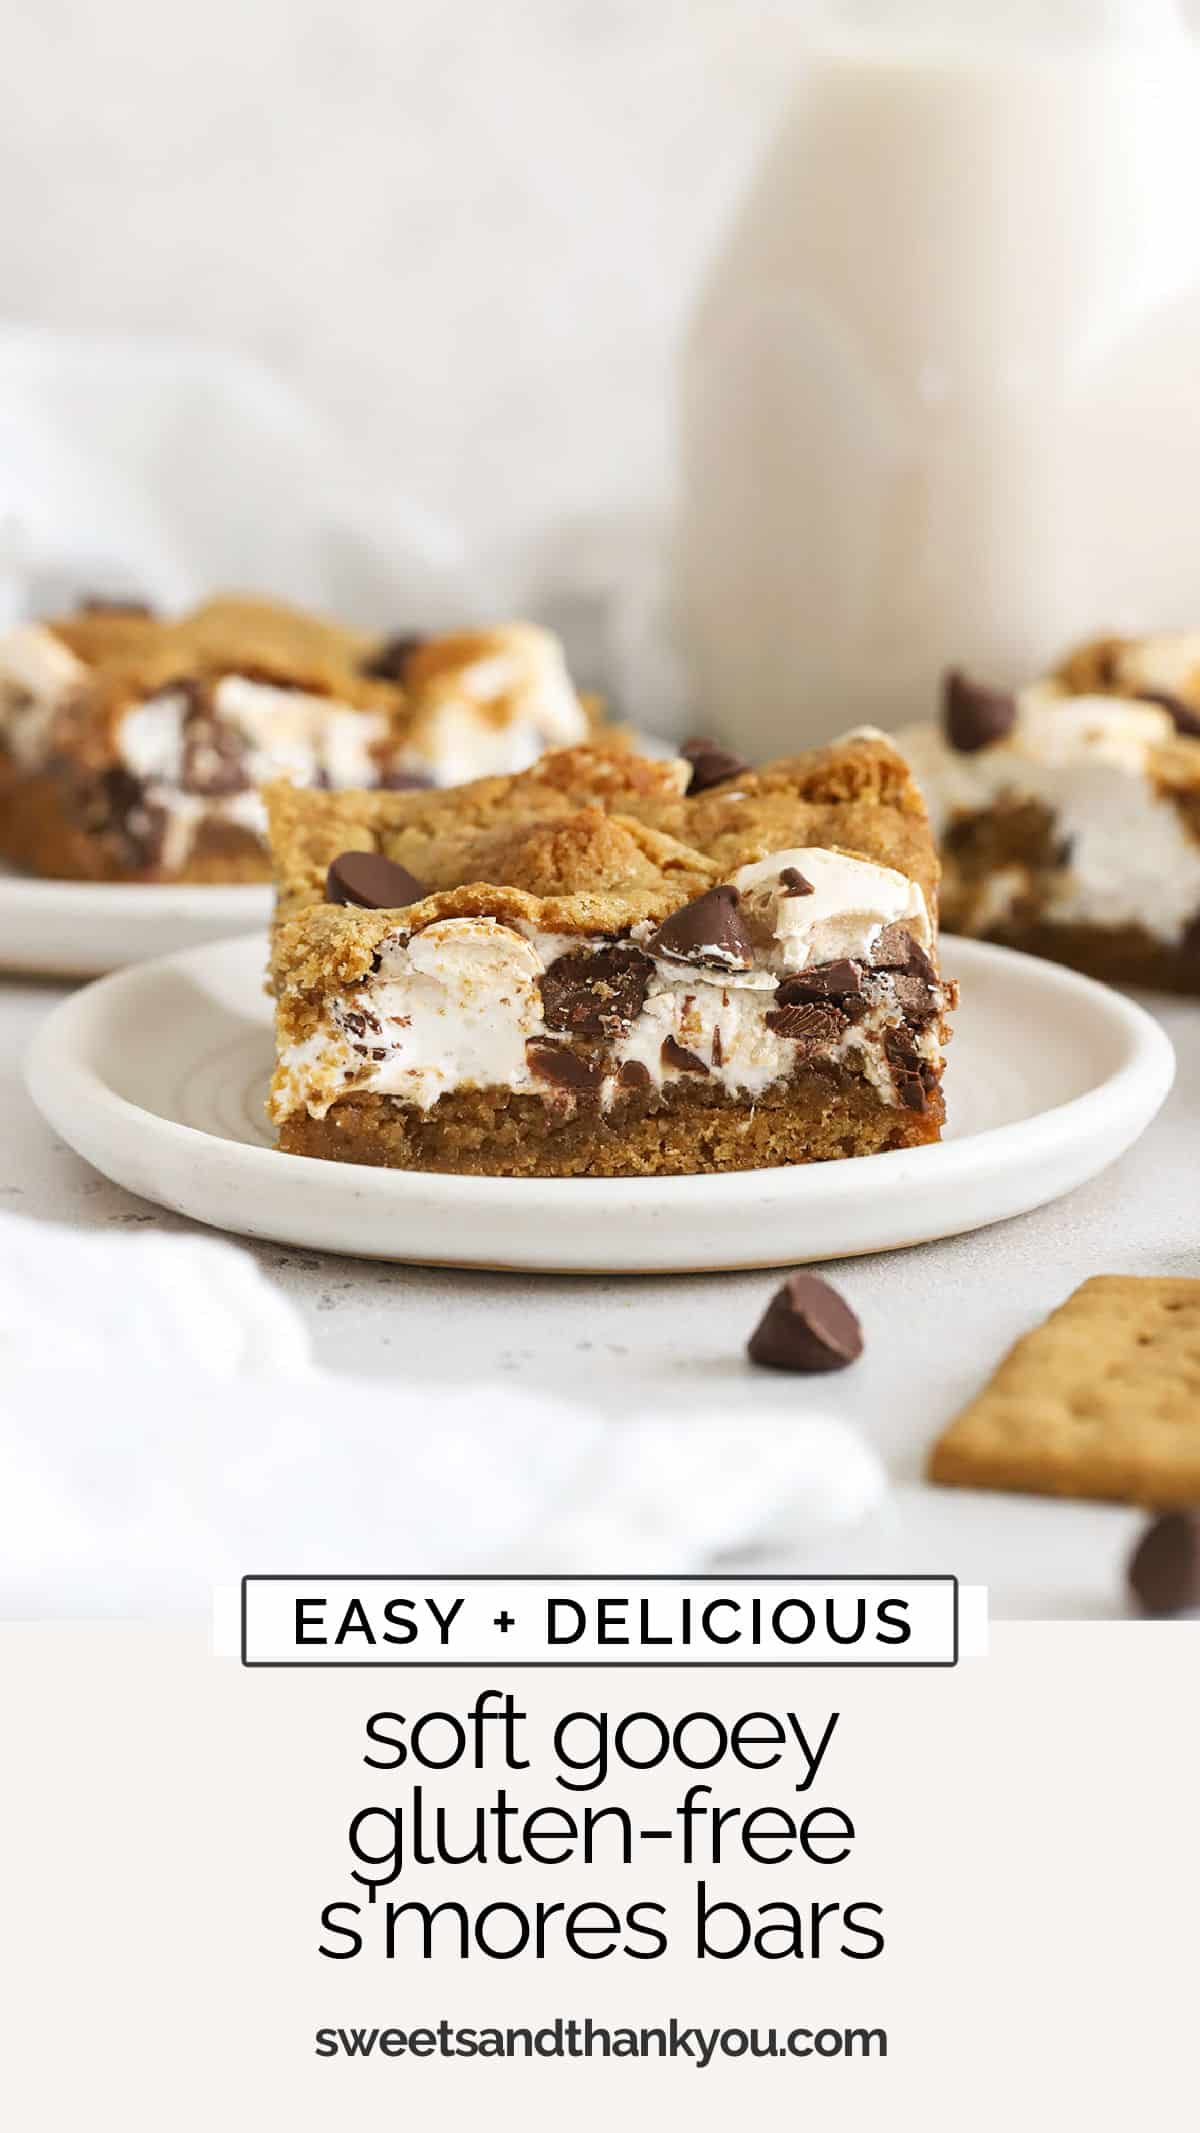 Soft, chewy gluten-free s'mores bars made with gooey marshmallow and melty chocolate between two layers of graham cookie. / gluten free smores bars recipe / gluten free smores cookie bars / gluten-free s'mores cookie bars / gluten-free s'mores recipe / gluten-free cookie bars / gluten-free summer dessert / gluten-free bar recipe /